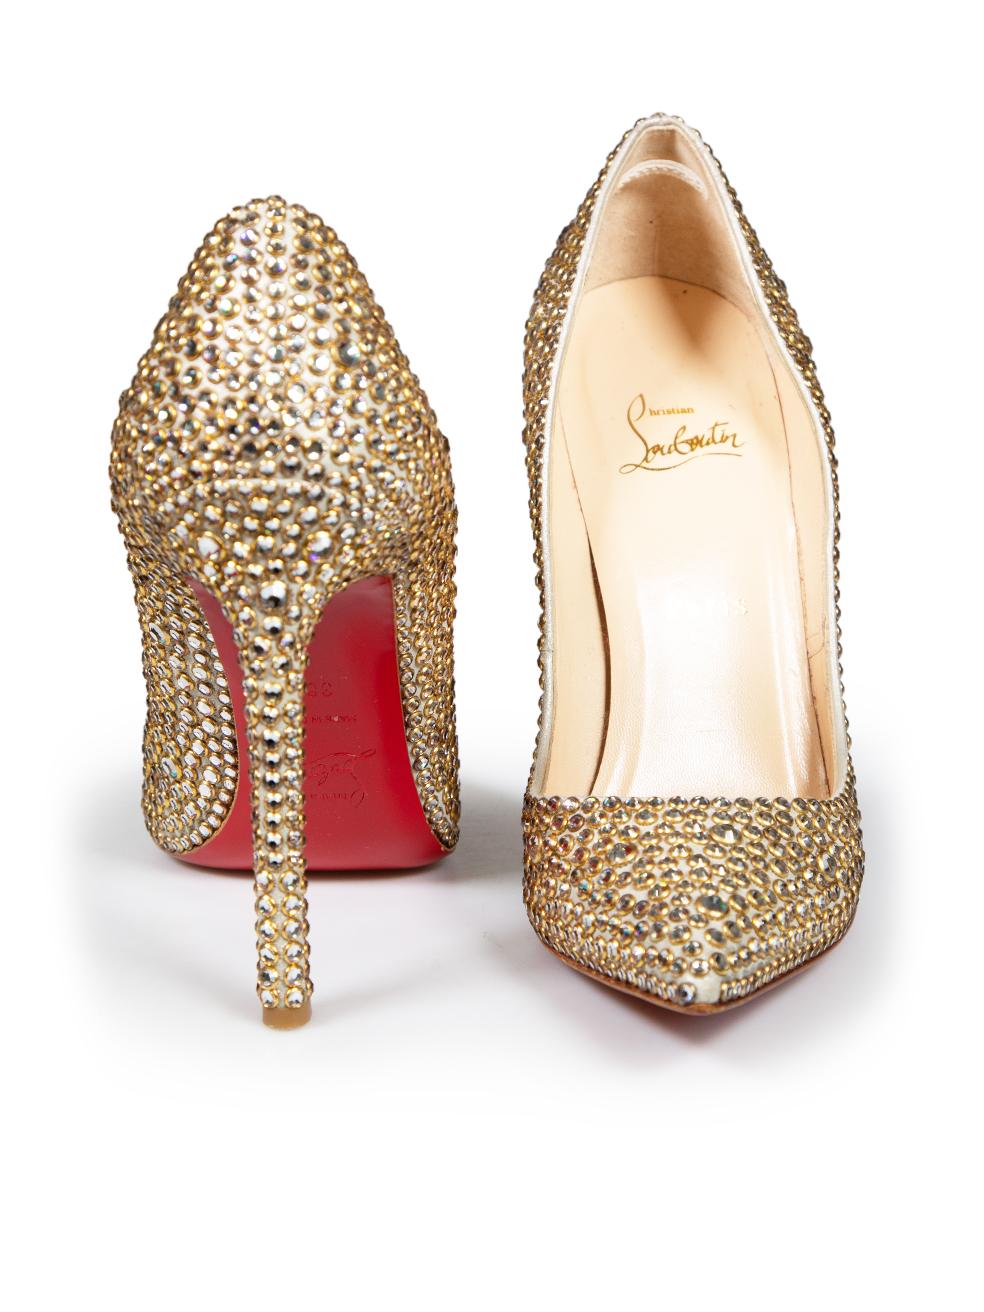 Christian Louboutin Metallic Leather Strass 120 Pigalle Follies Heels IT 38.5 In Excellent Condition For Sale In London, GB